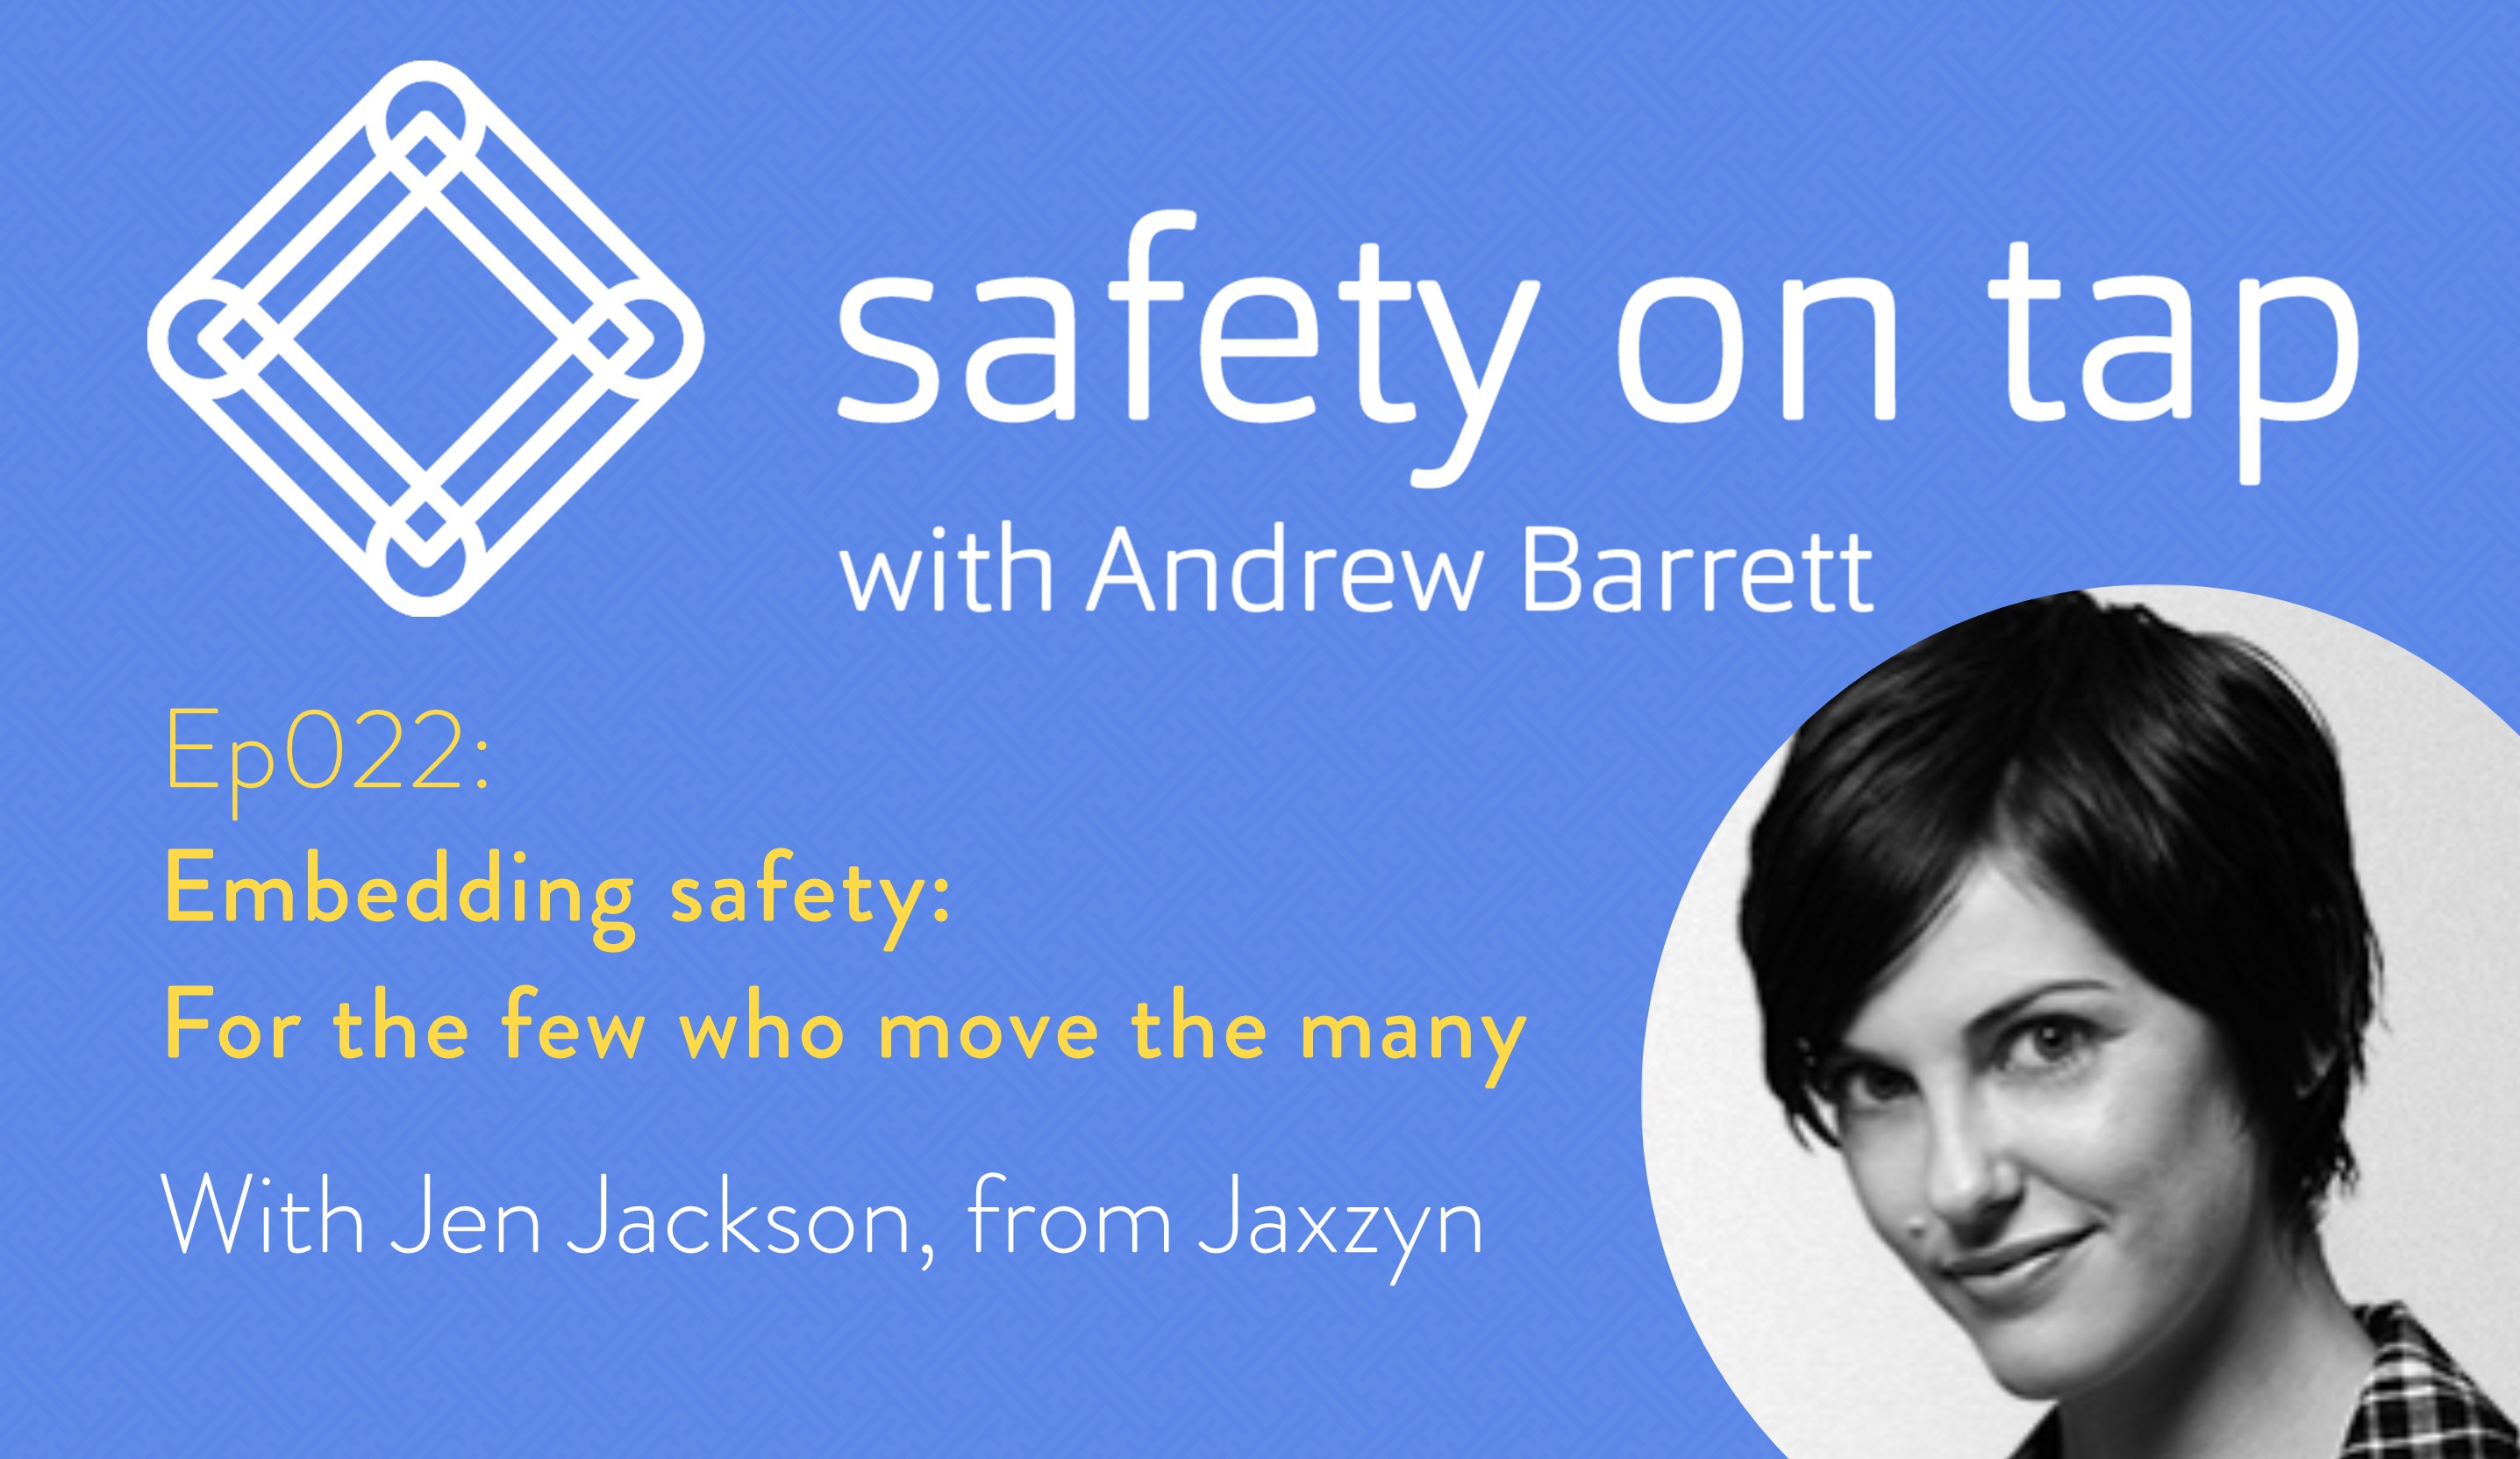 Ep022: Embedding safety: For the few who move the many